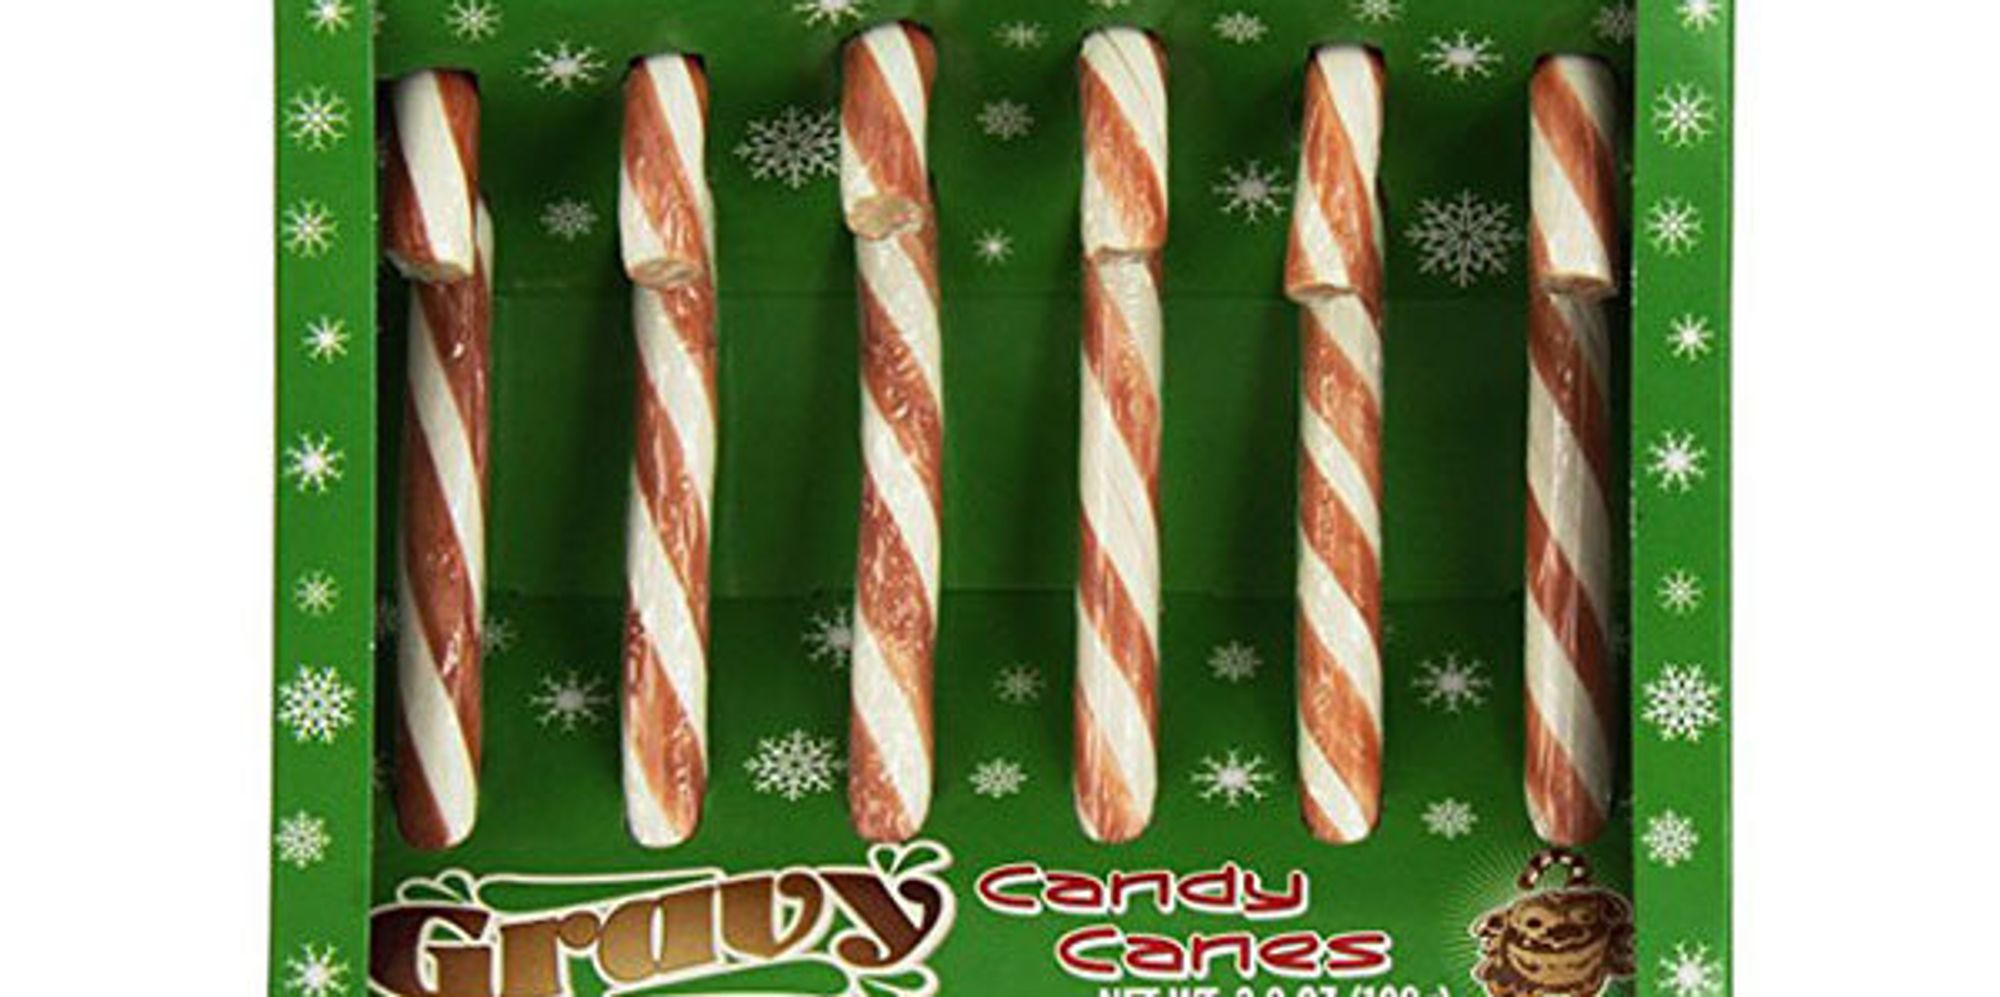 7 Candy Cane Flavors That Keep The Holidays Weird - Huffington Post